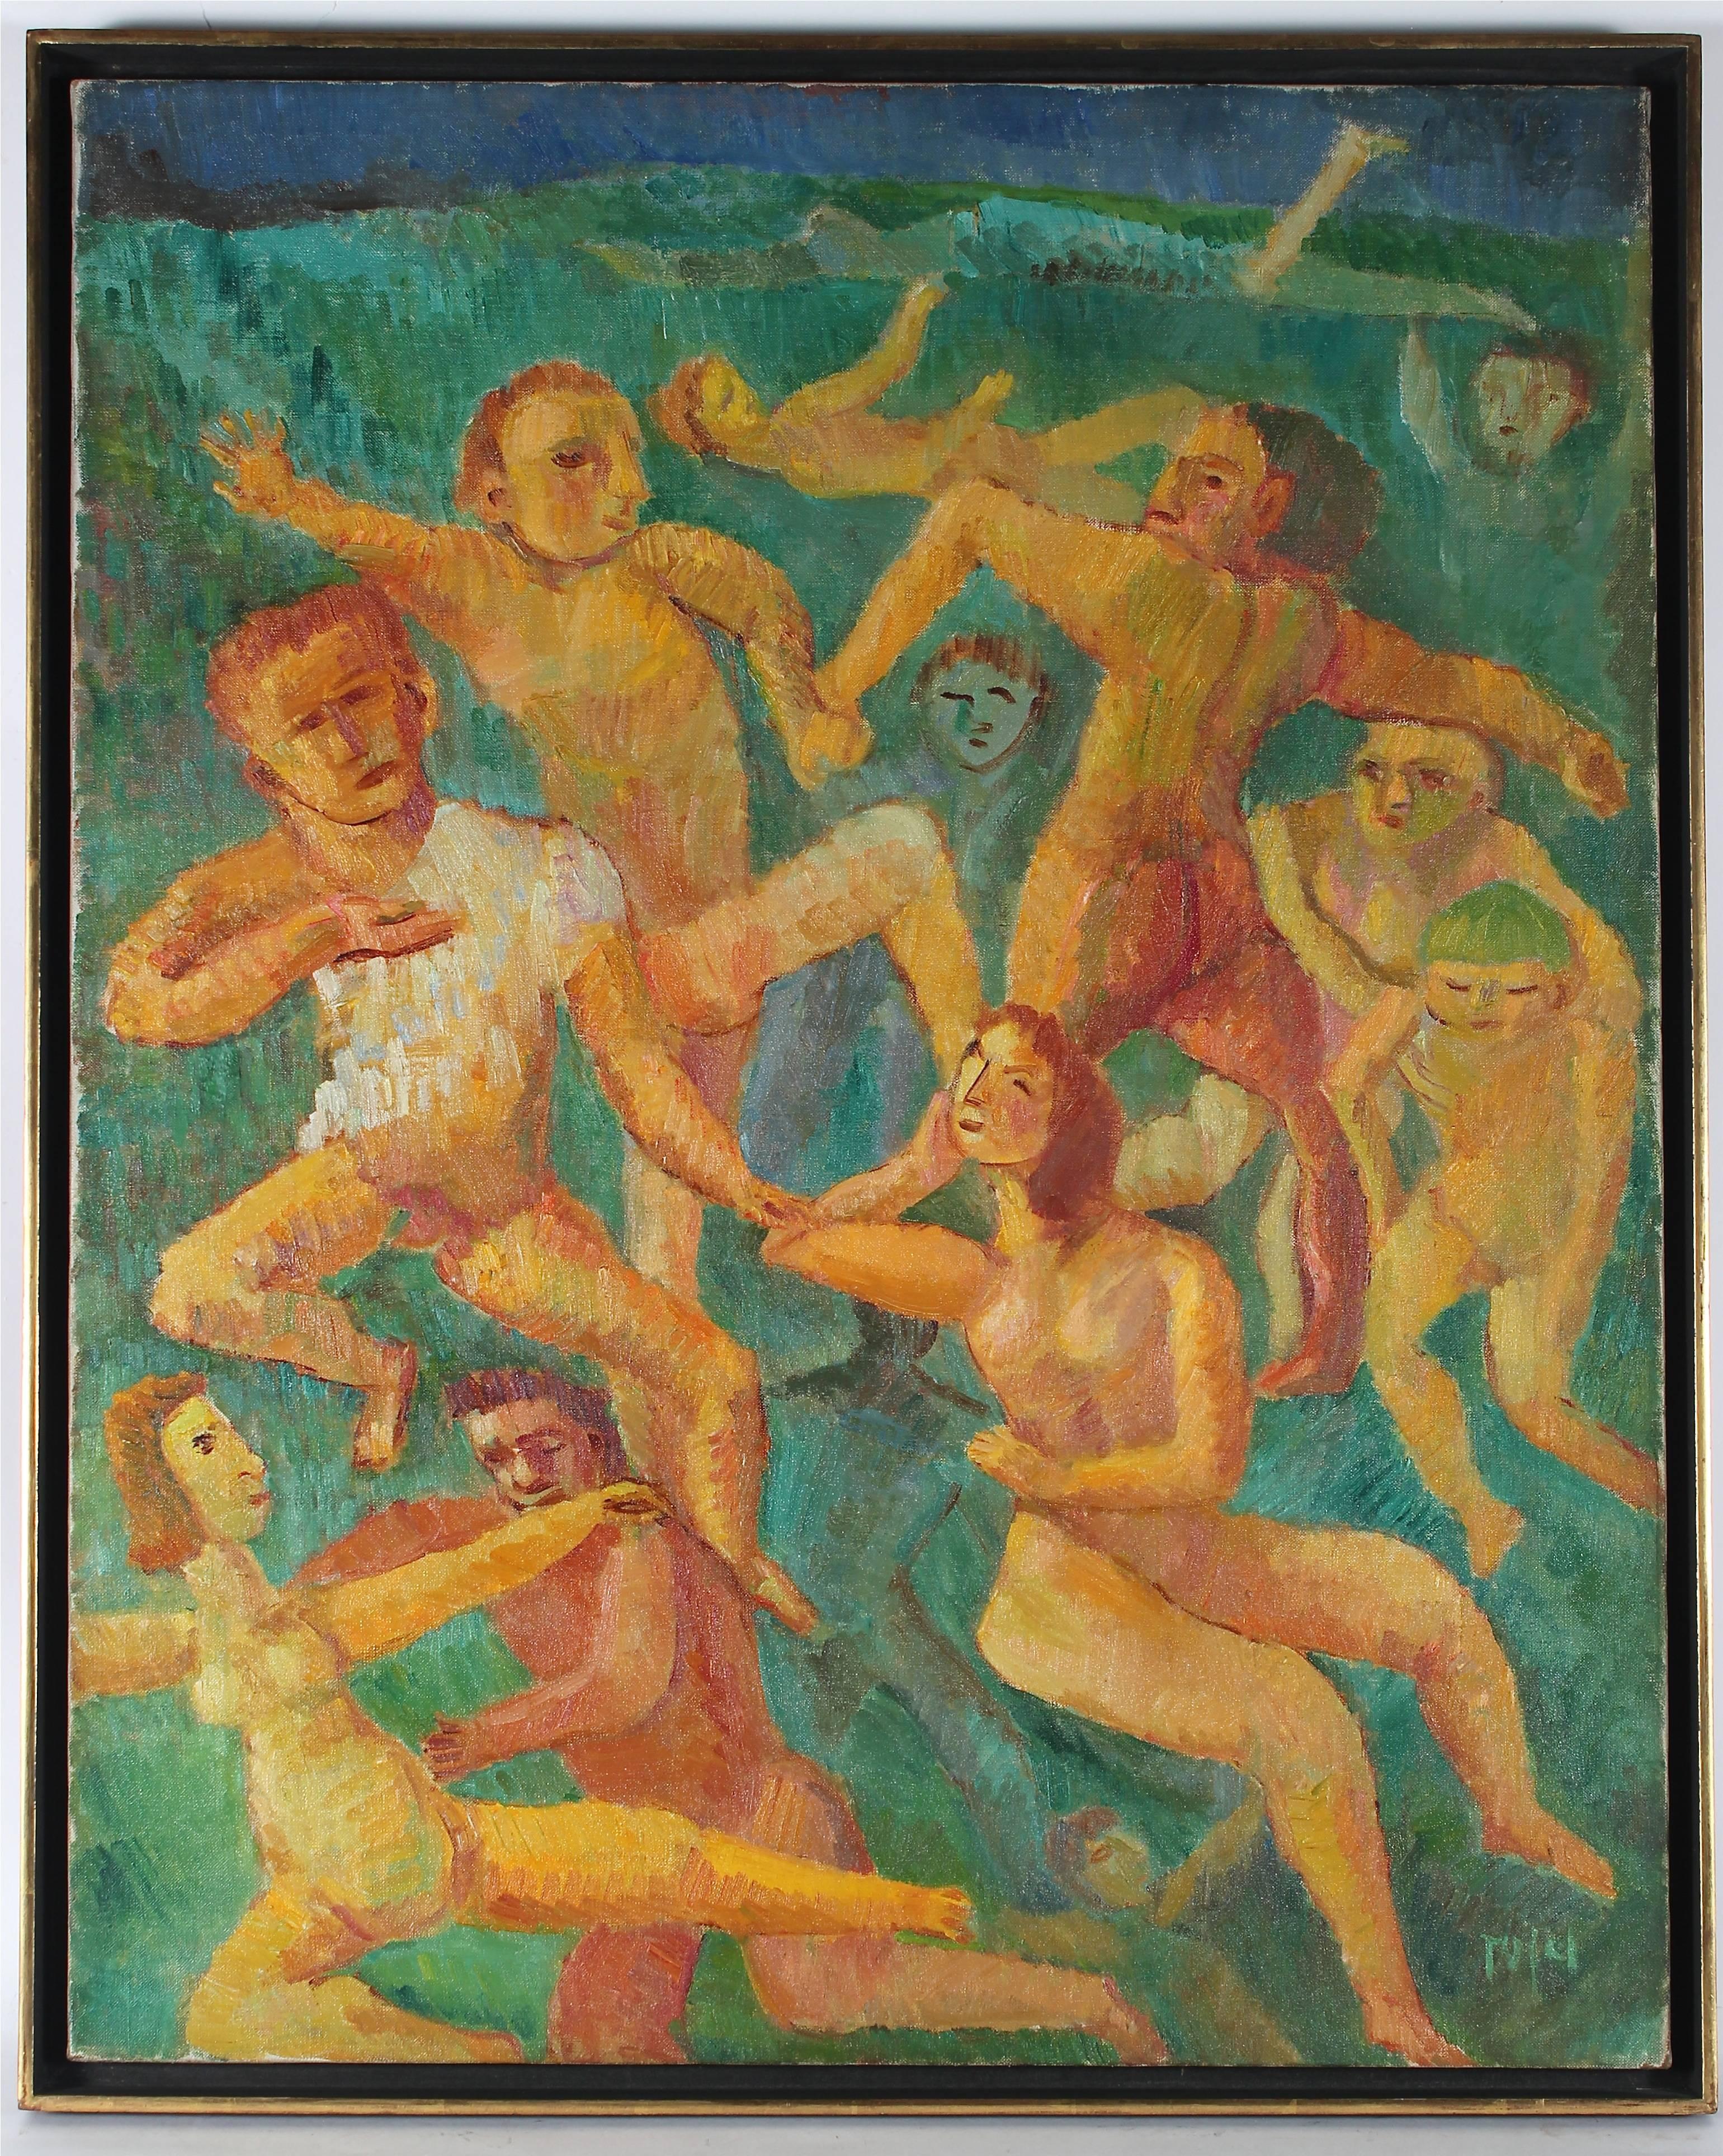 Jennings Tofel Figurative Painting - "Swimmers" Expressionist Figurative Scene, Oil on Canvas, 1948